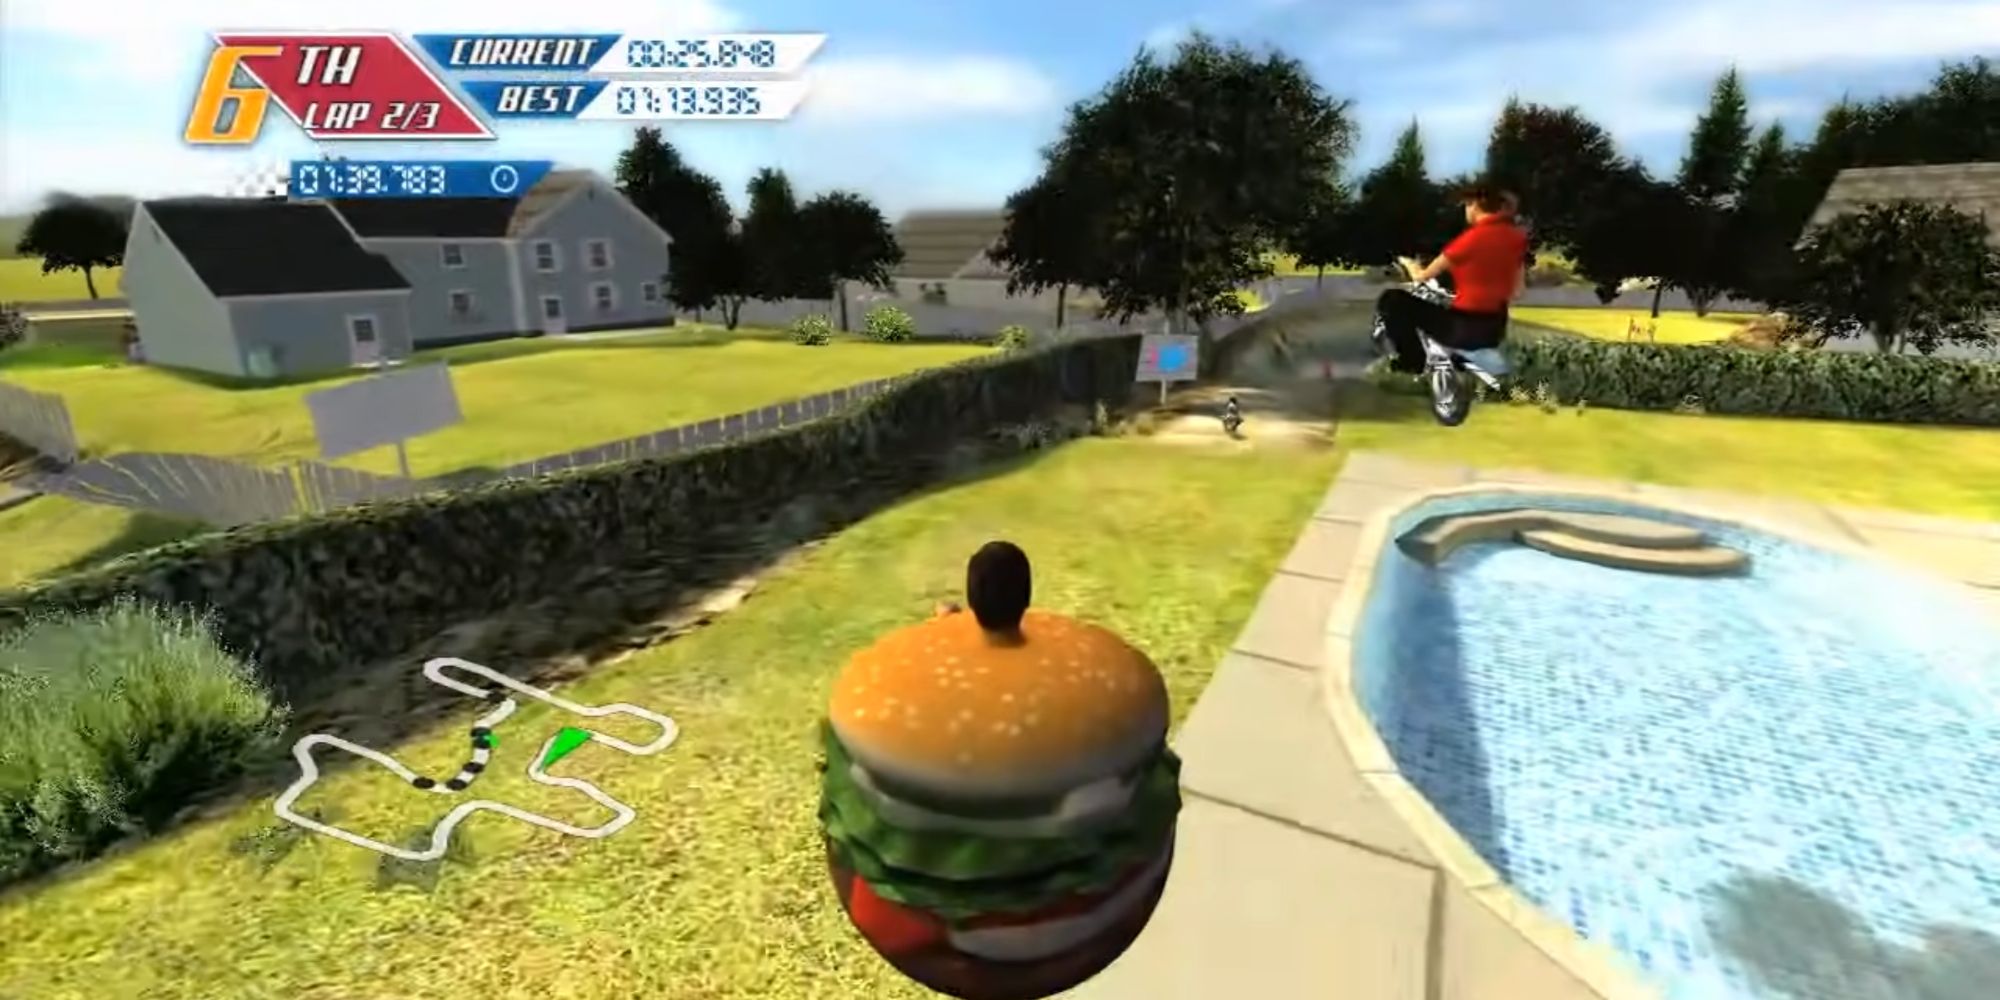 A screenshot from the Burger King game PocketBike Racer, showing a man in a hamburger costume driving off a ramp in someone's backyard